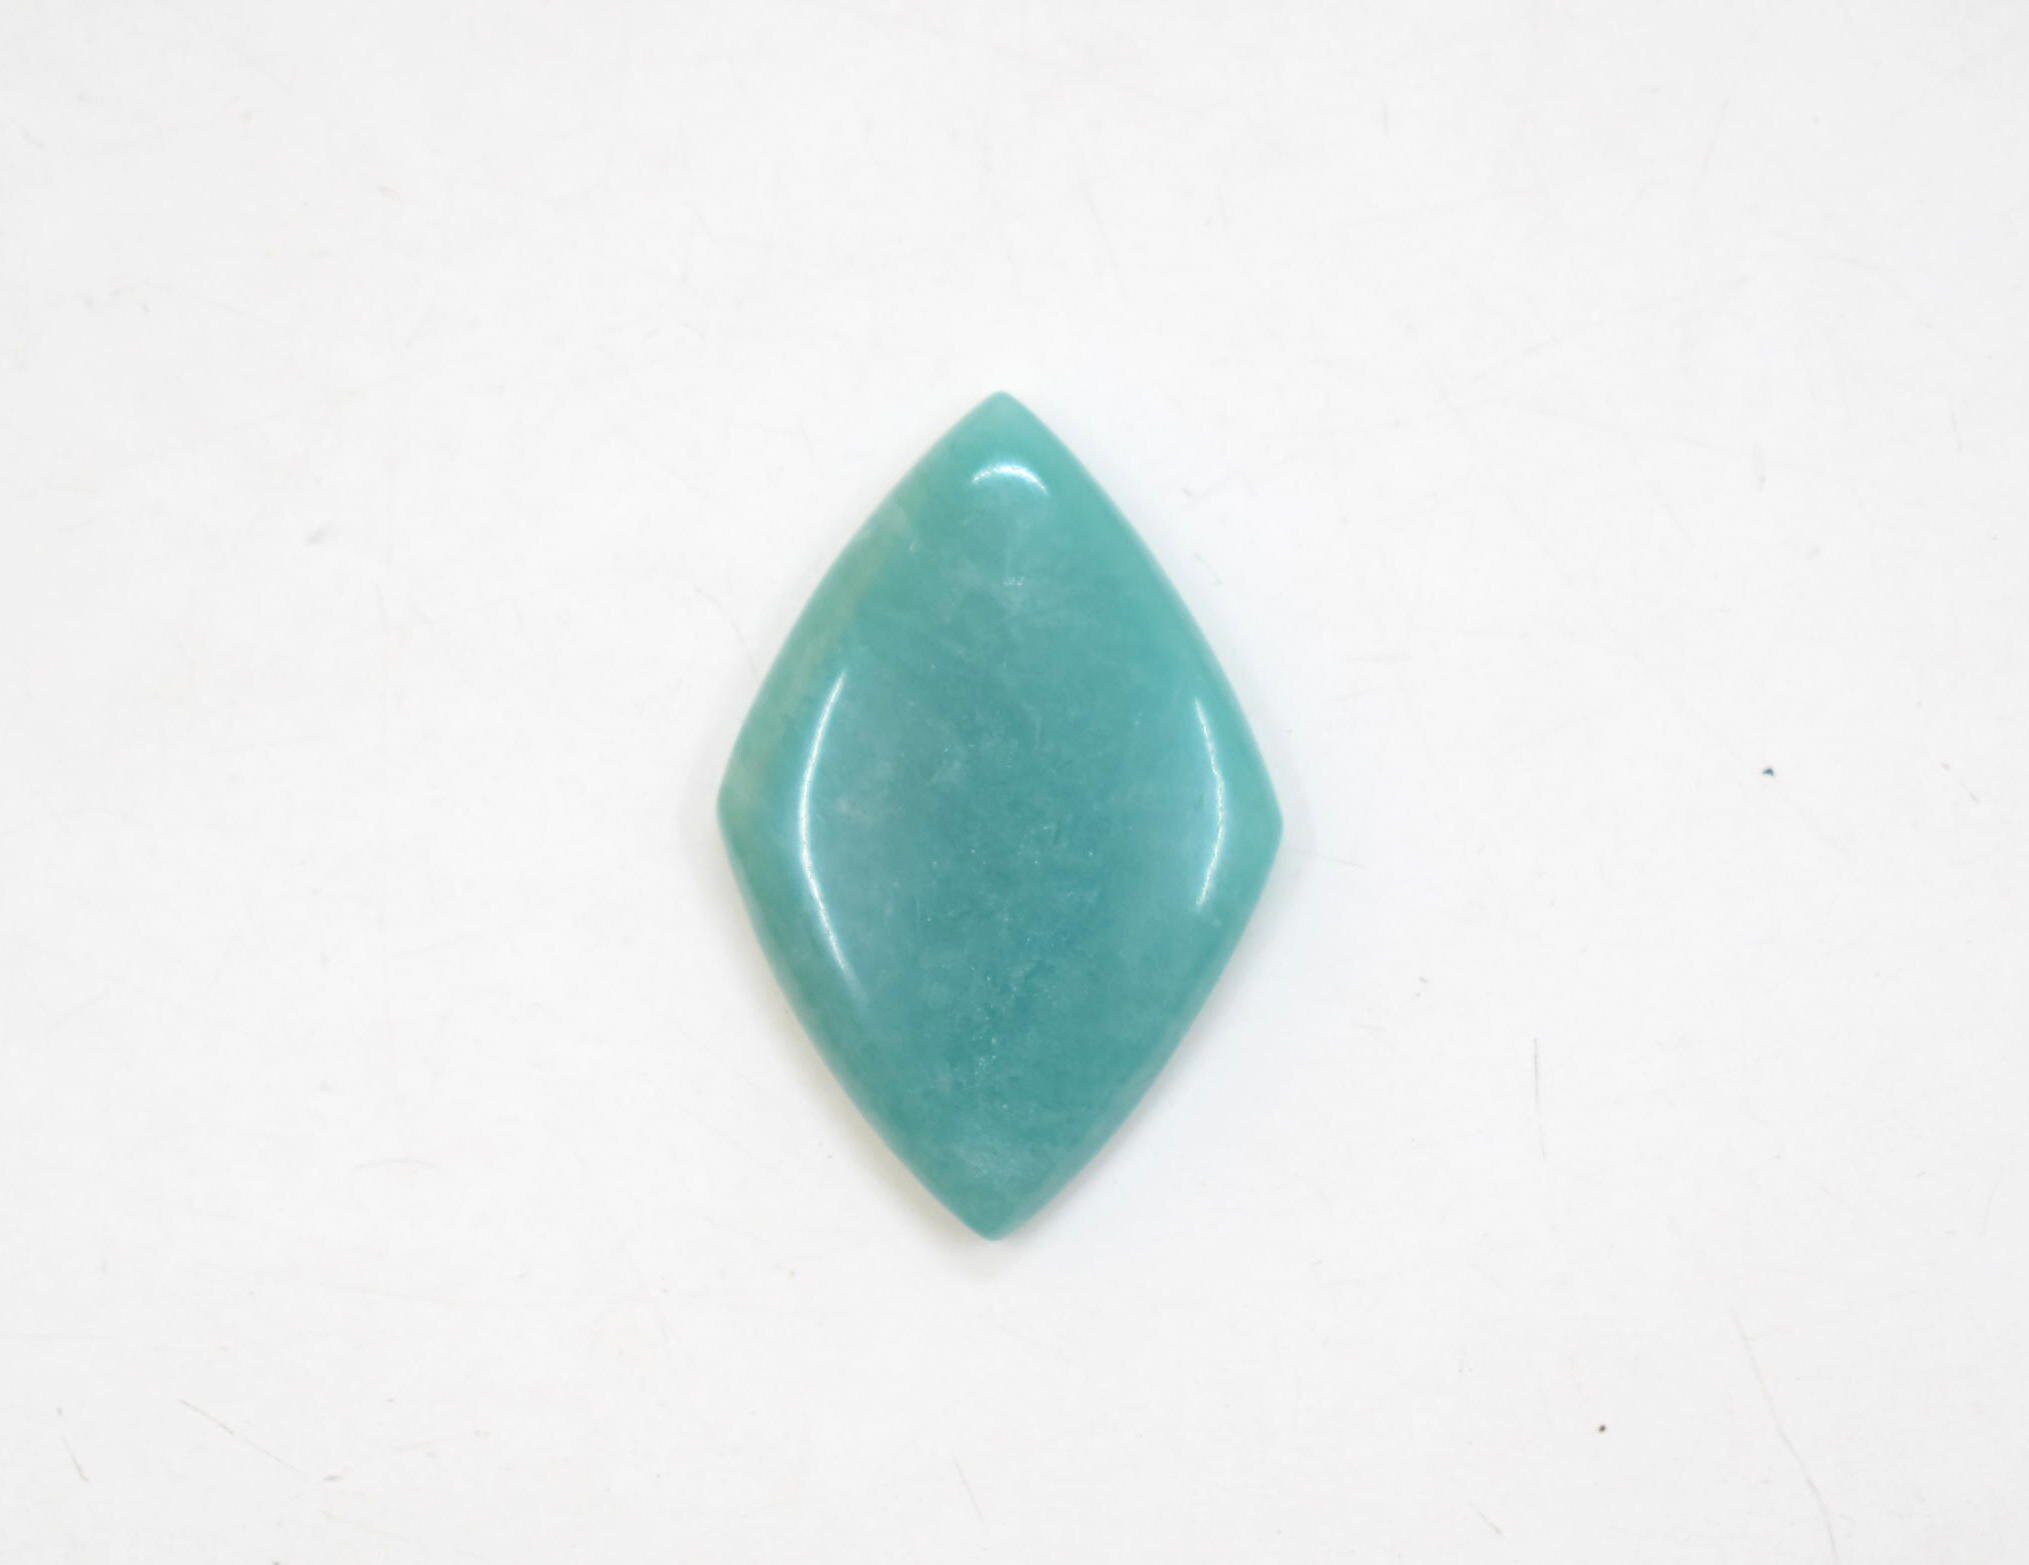 100% Natural African Amazonite Cabochon,Green Amazonite,Handmade Plain Cabochon,Handmade Faceted Cabochon,Natural Color Amazonite | Save 33% - Rajasthan Living 15